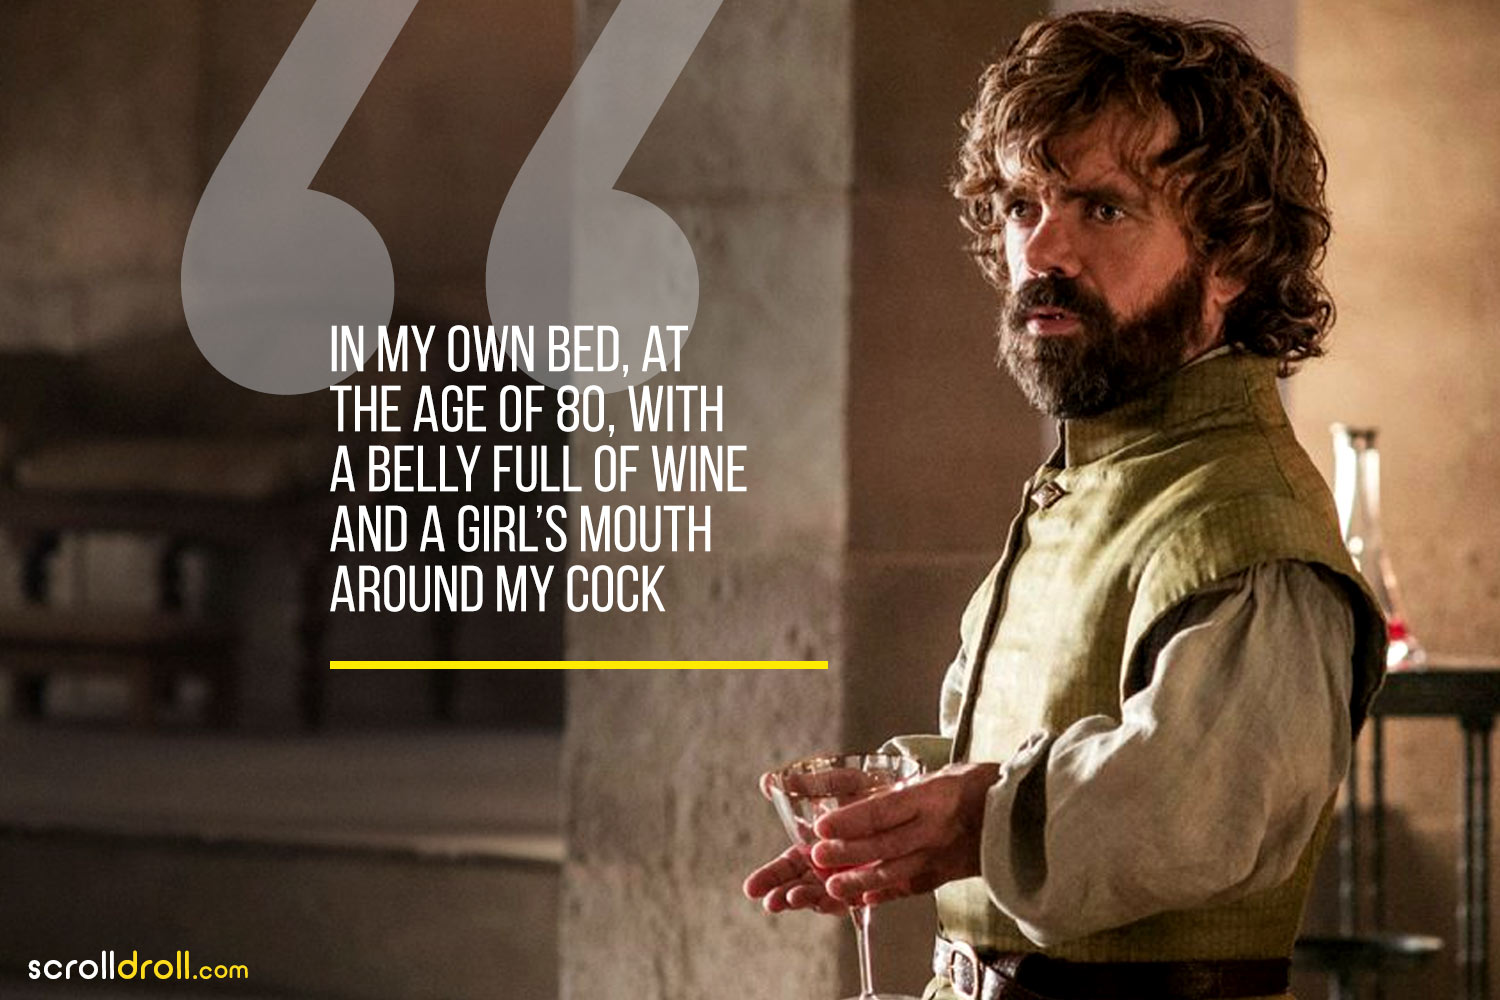 Tyrion Lannister Quotes (10)